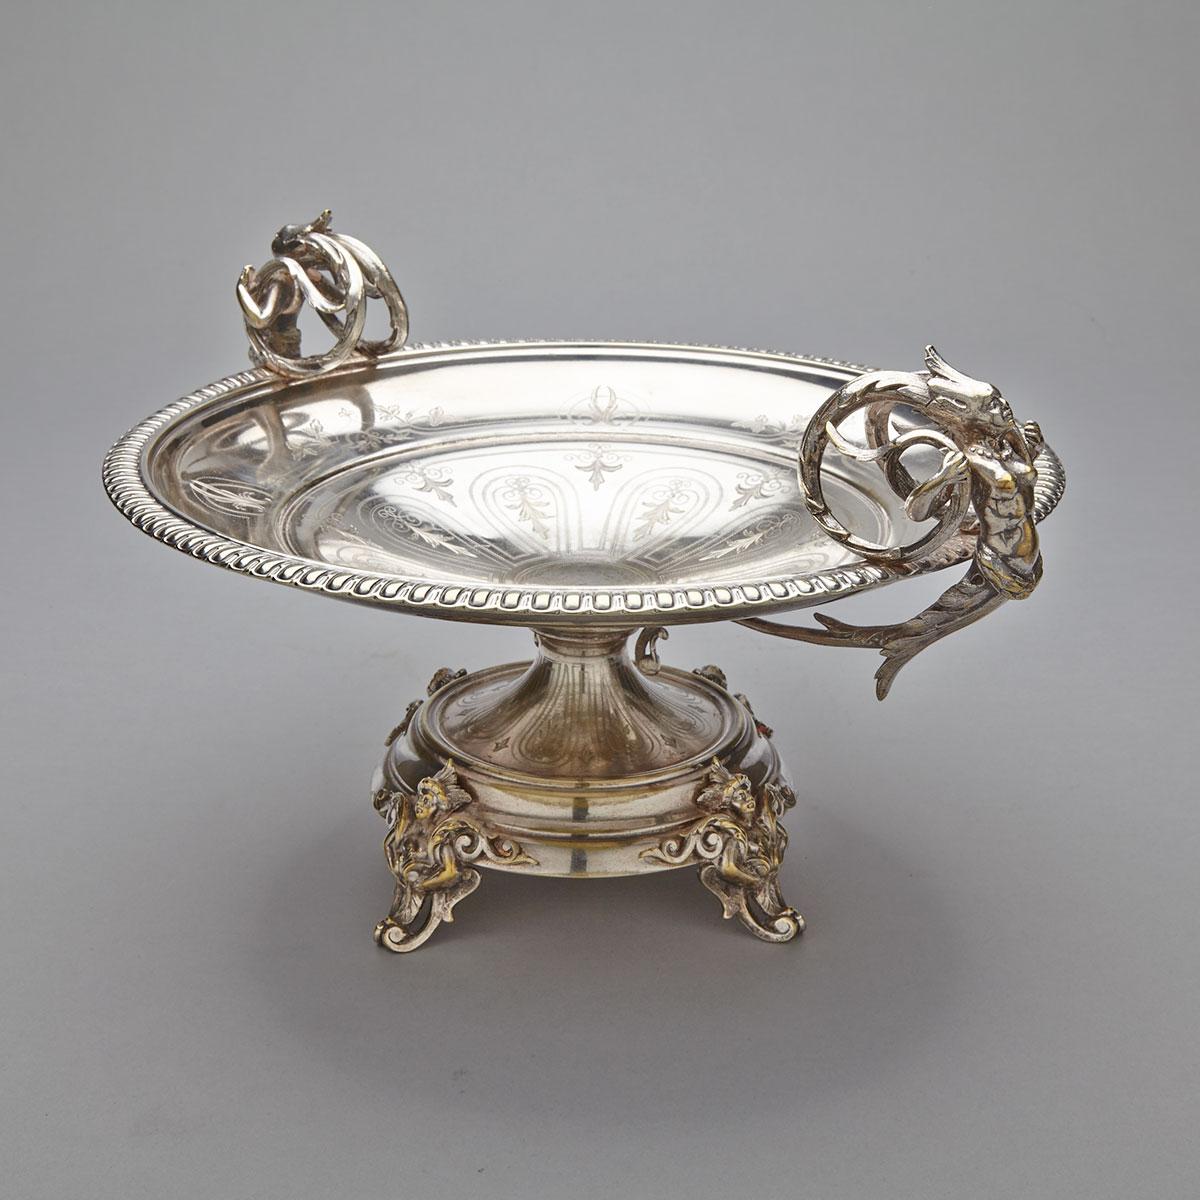 Continental Silver Plated Pedestal Footed Comport, late 19th century